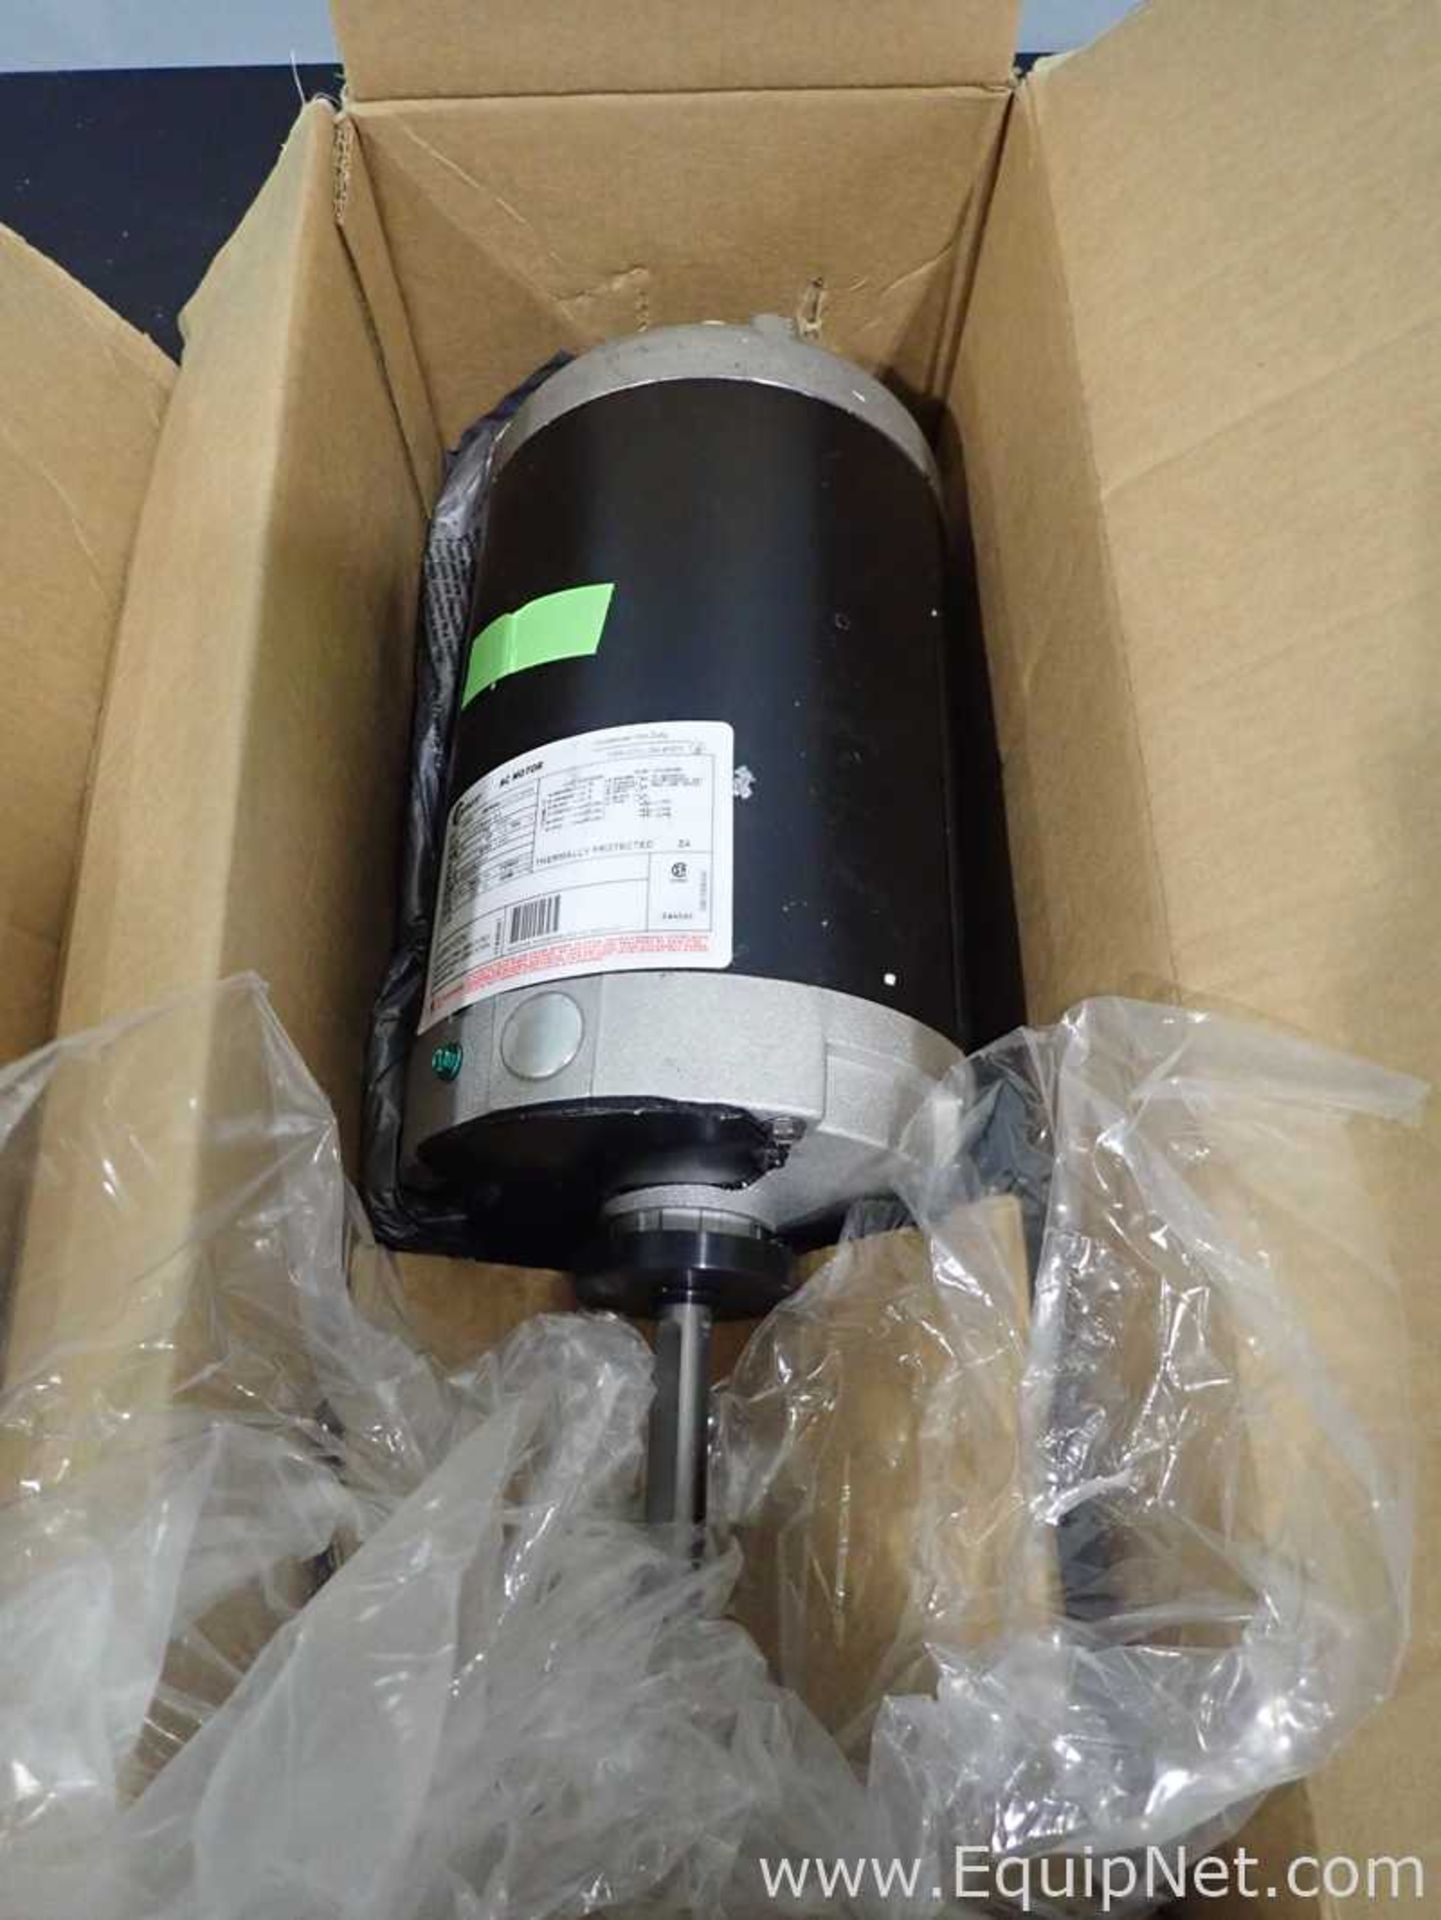 EQUIPNET LISTING #793359; REMOVAL COST: $25; DESCRIPTION: Unused Lot of 3 Century Electric Motor - Image 5 of 10